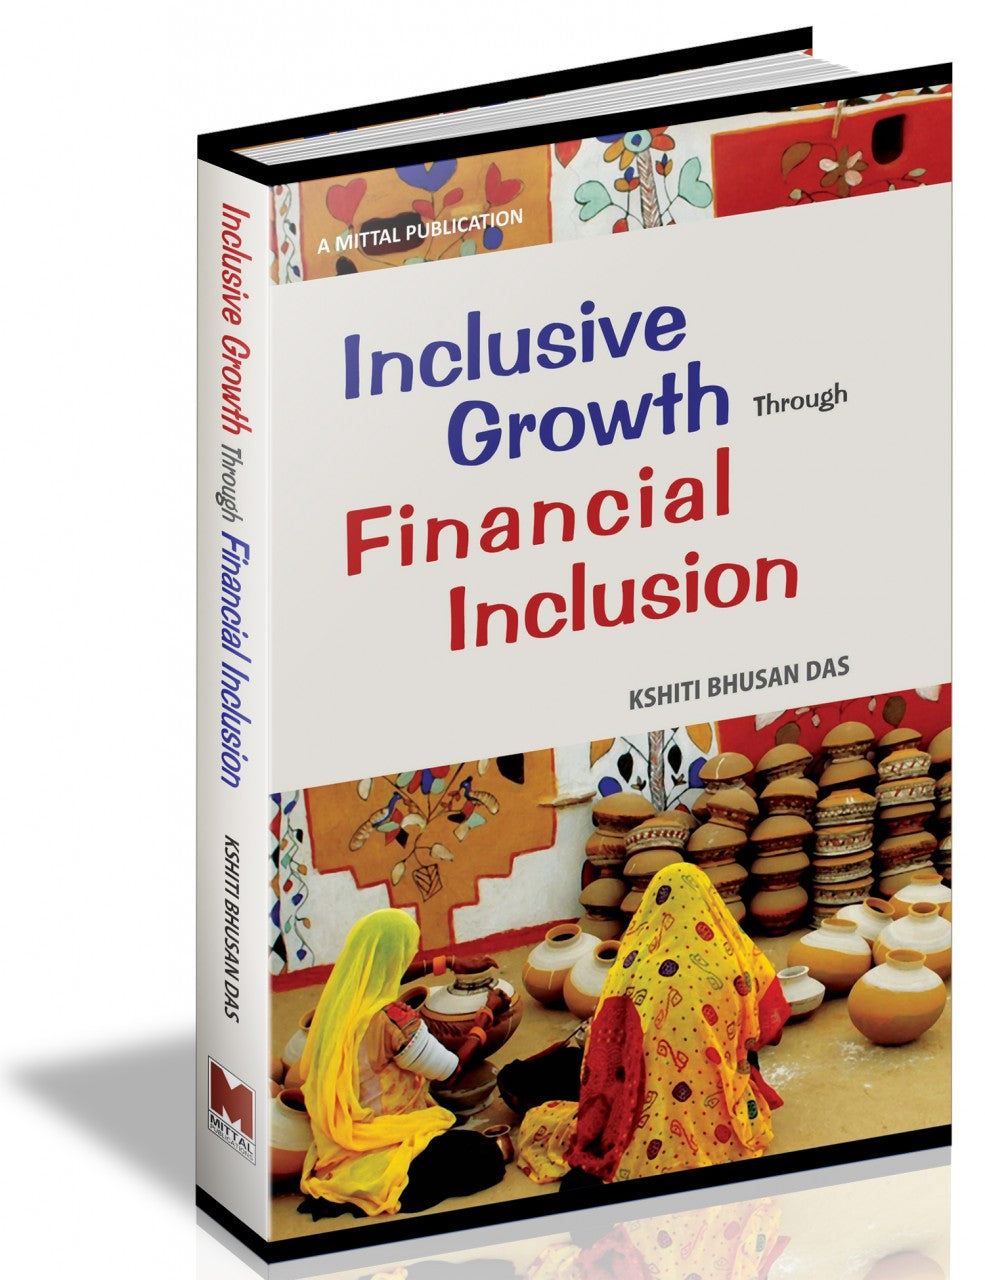 Inclusive Growth through Financial Inclusion